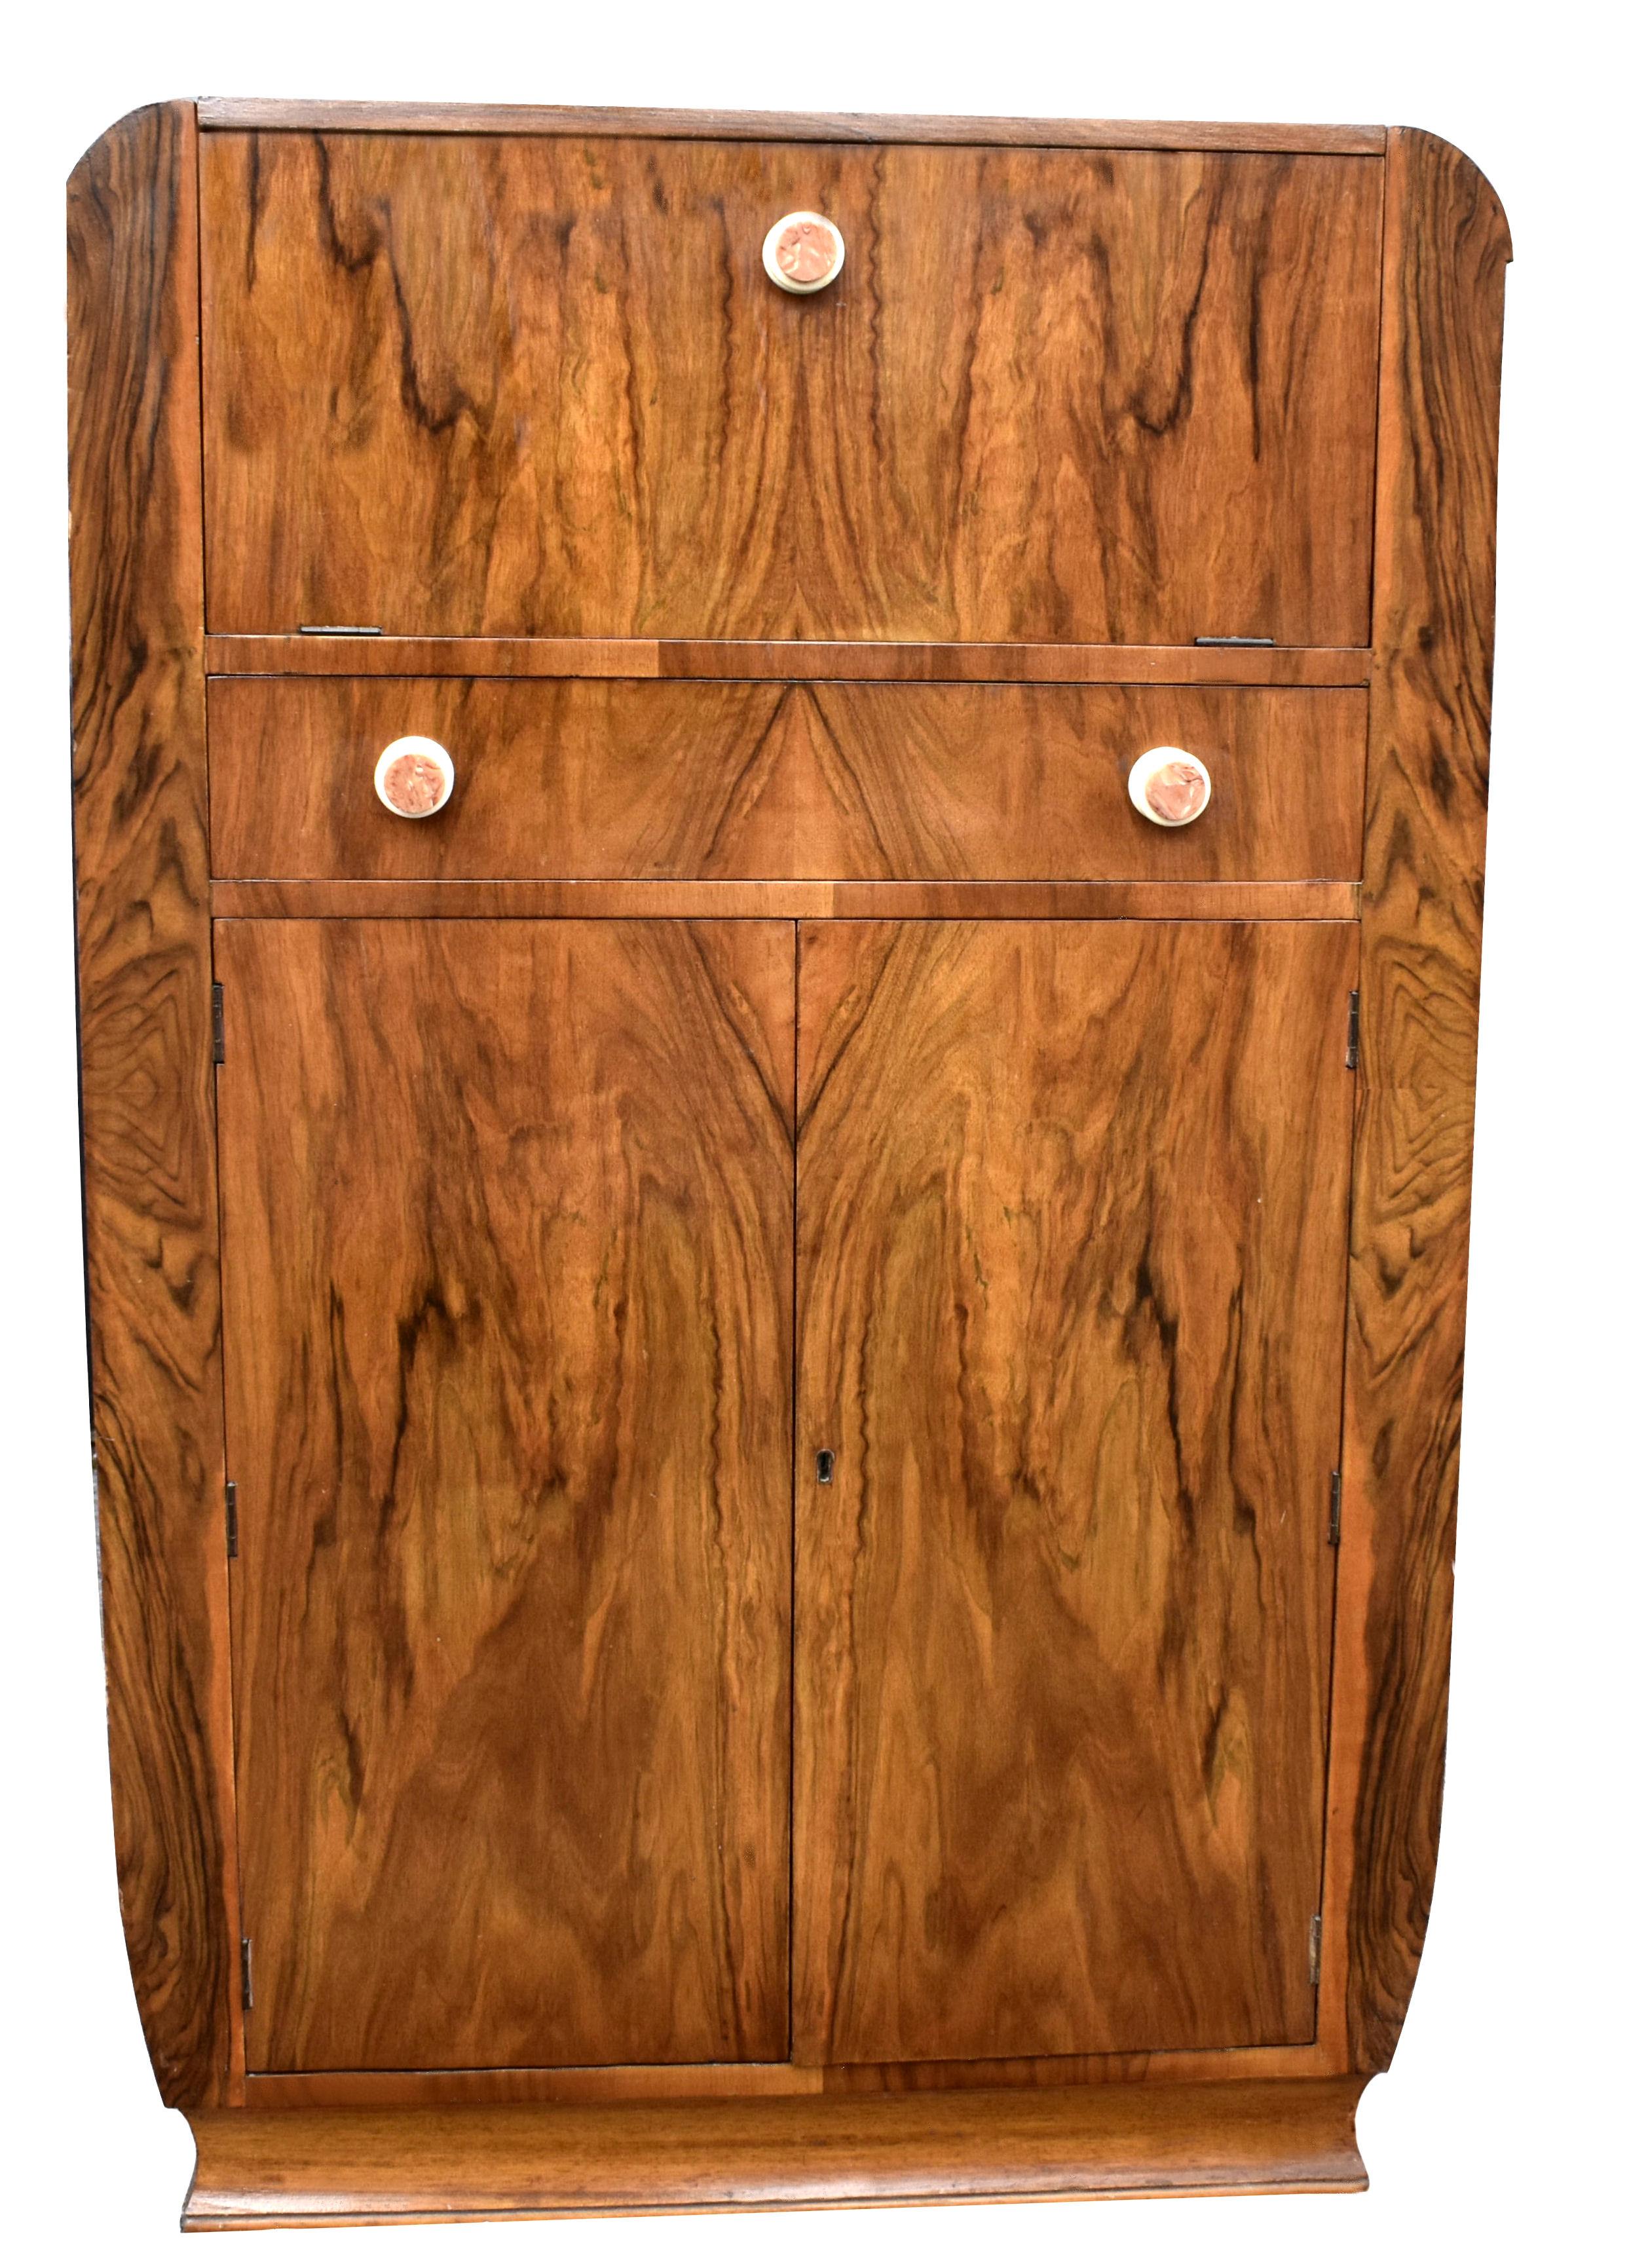 Beautiful 1930's Art Deco walnut upright cocktail cabinet, every Deco interior should have one of these ! Features a drop down top which reveals a mirrored interior and storage for glasses. A generously sized cupboard below offers plenty of storage